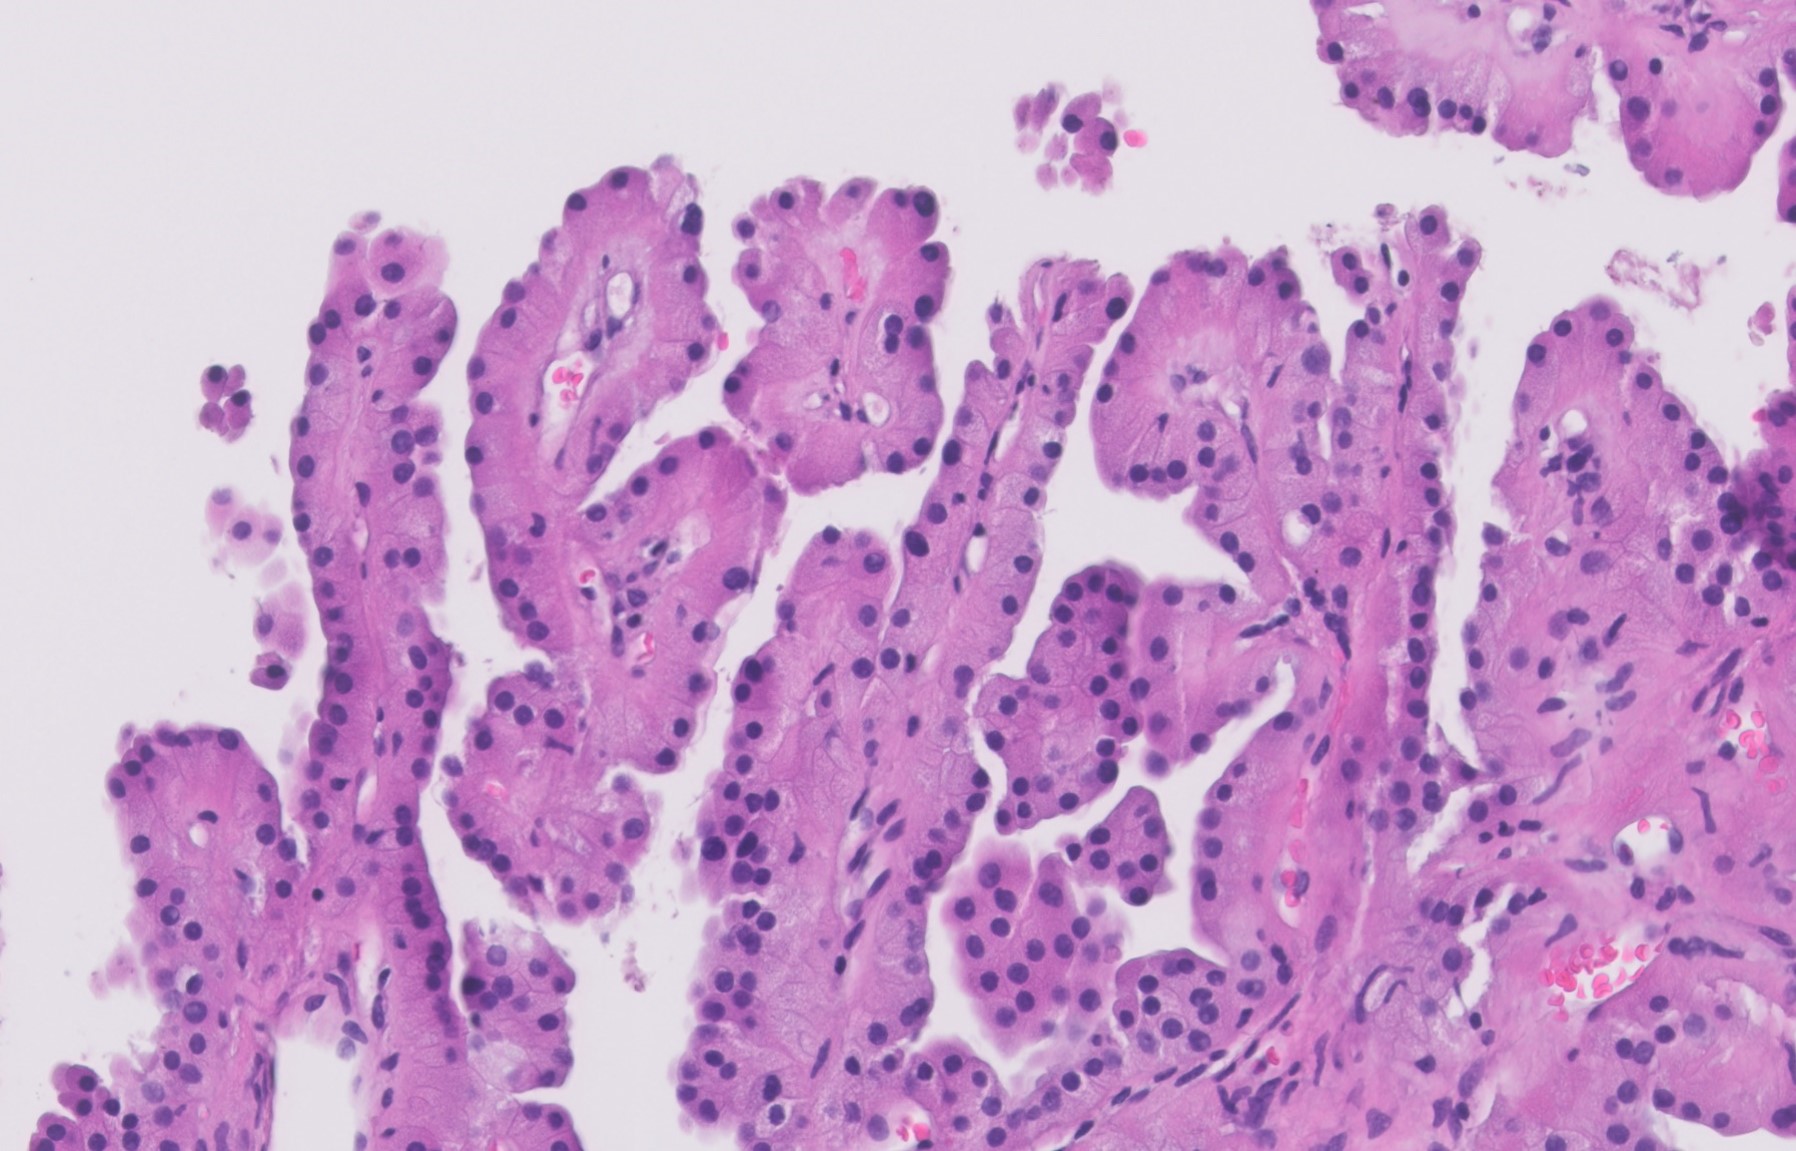 Microscopic image possibly detecting cancerous areas in human tissue